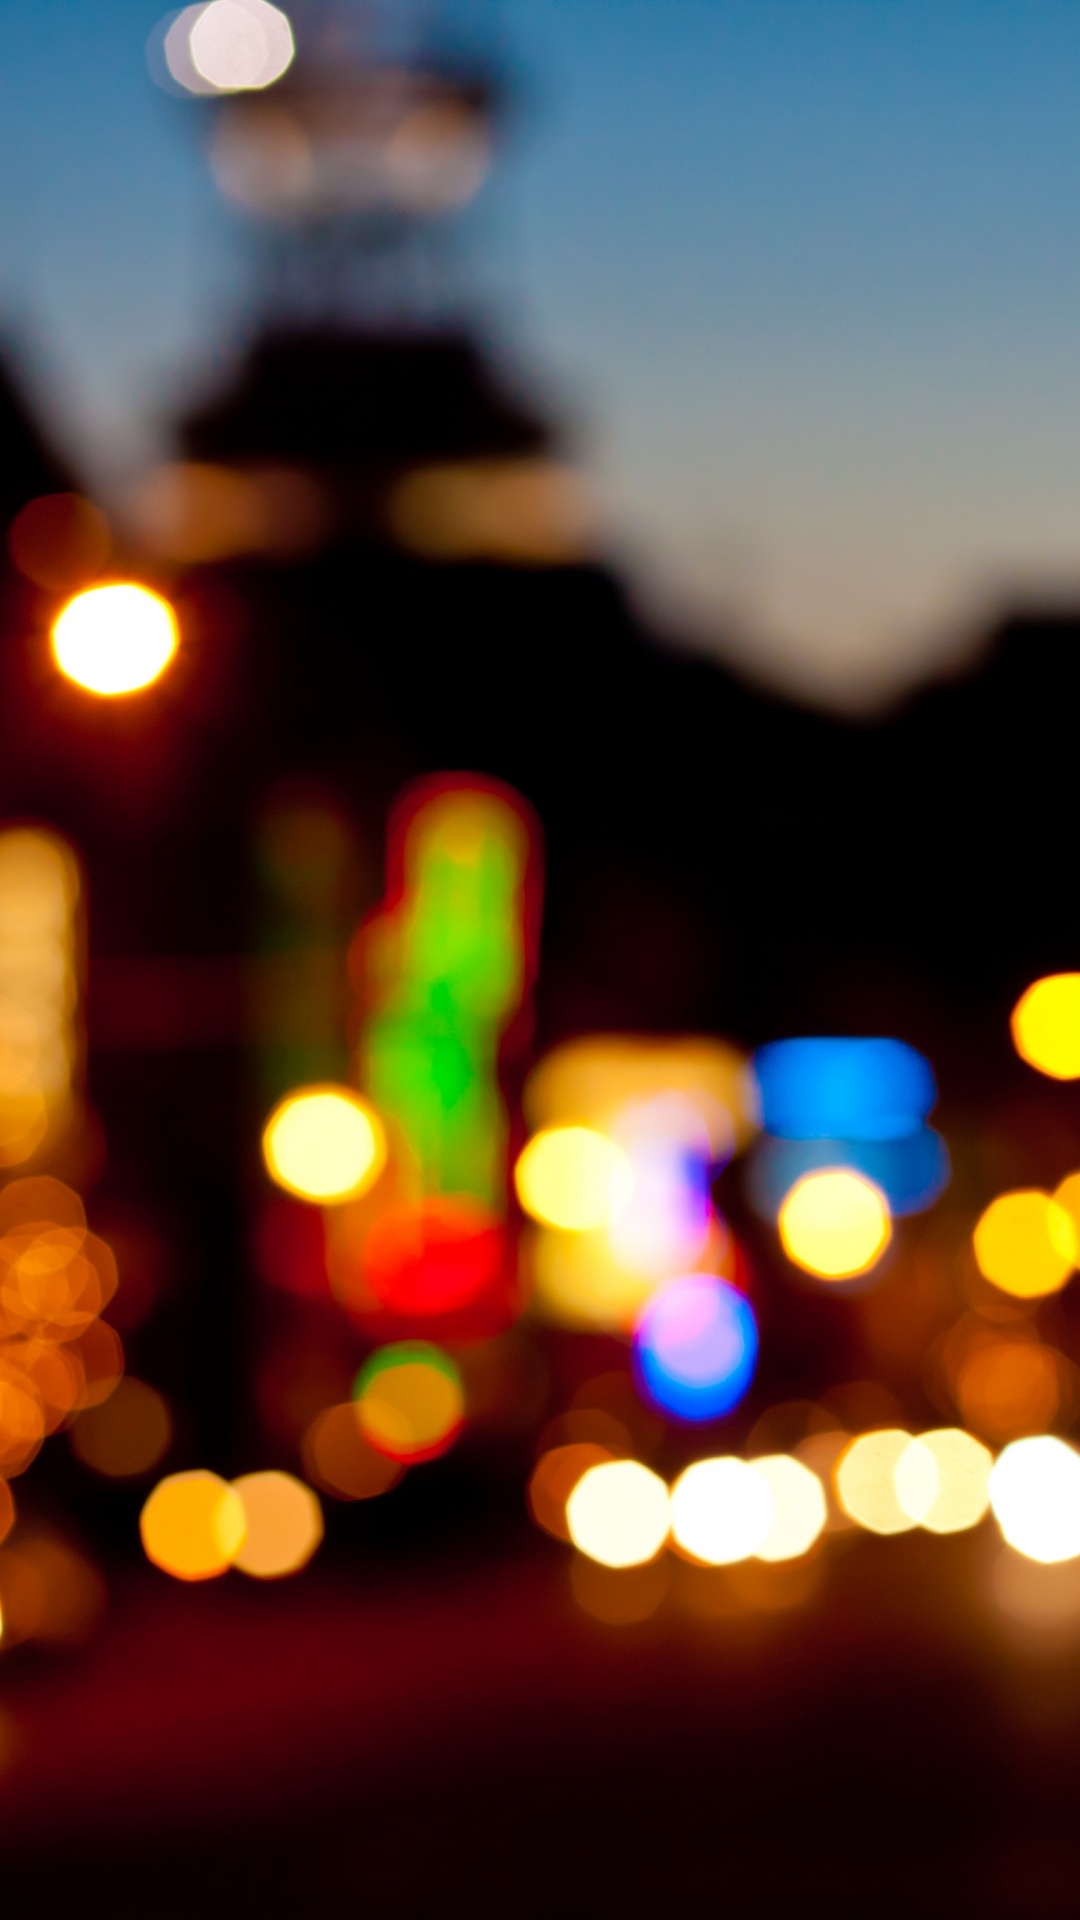 Bokeh Photography of City Lights During Night Time. Wallpaper in 1080x1920 Resolution